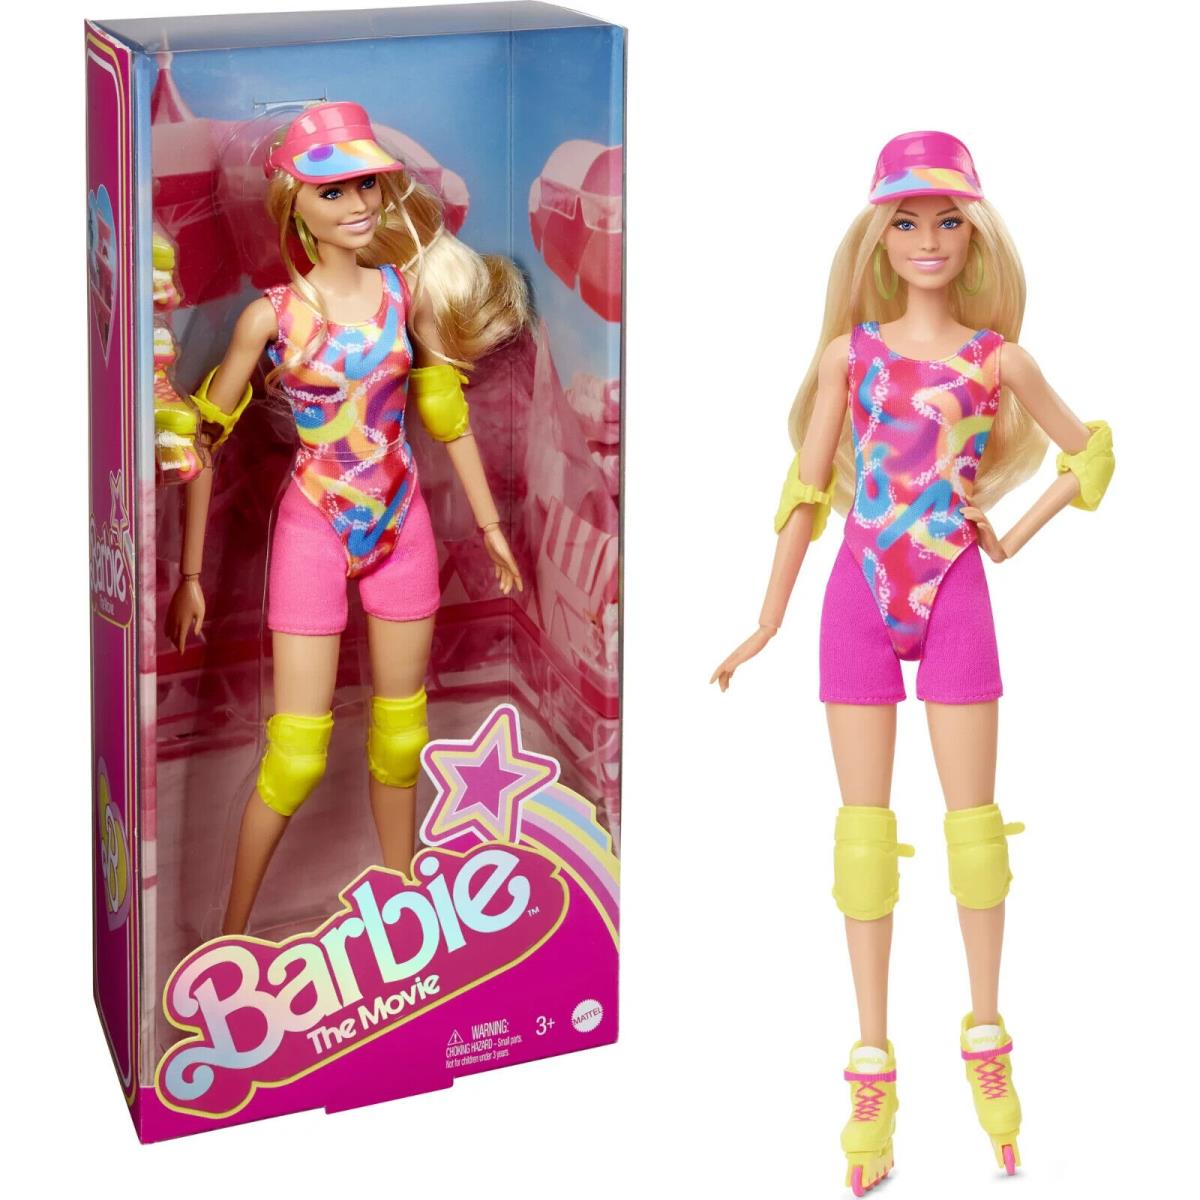 Barbie The Movie Collectible Doll Margot Robbie As Barbie in Inline Skating